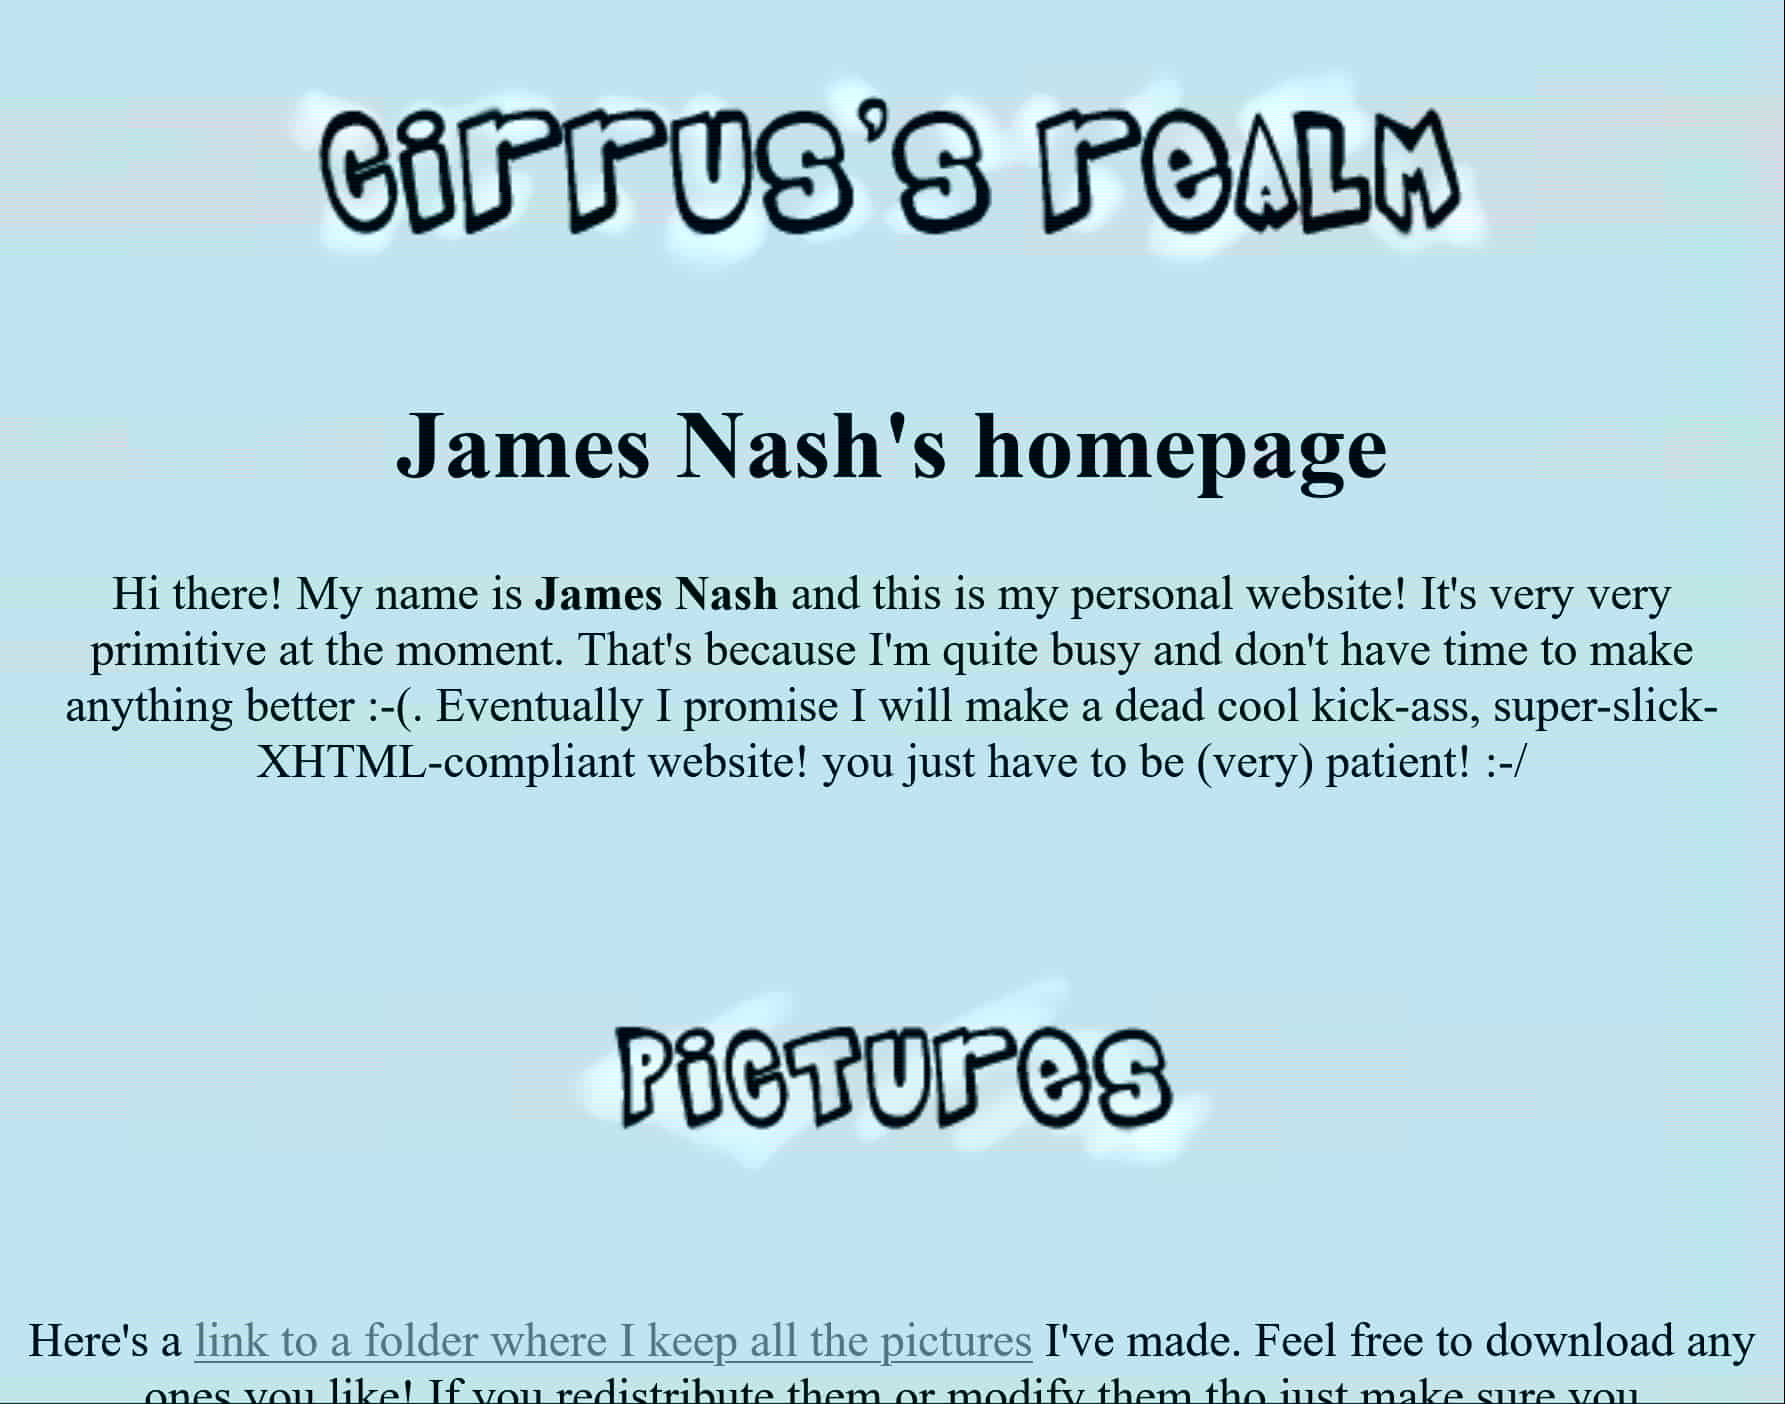 Screenshot of a webpage titled 'Cirrus's Realm'. Below the title graphic it says: Hi there! My name is James Nash and this is my personal website! It's very very primitive at the moment. That's because I'm quite busy and don't have time to make anything better. Eventually I promise I will make a dead cool kick-ass, super-slick-XHTML-compliant website! you just have to be (very) patient!